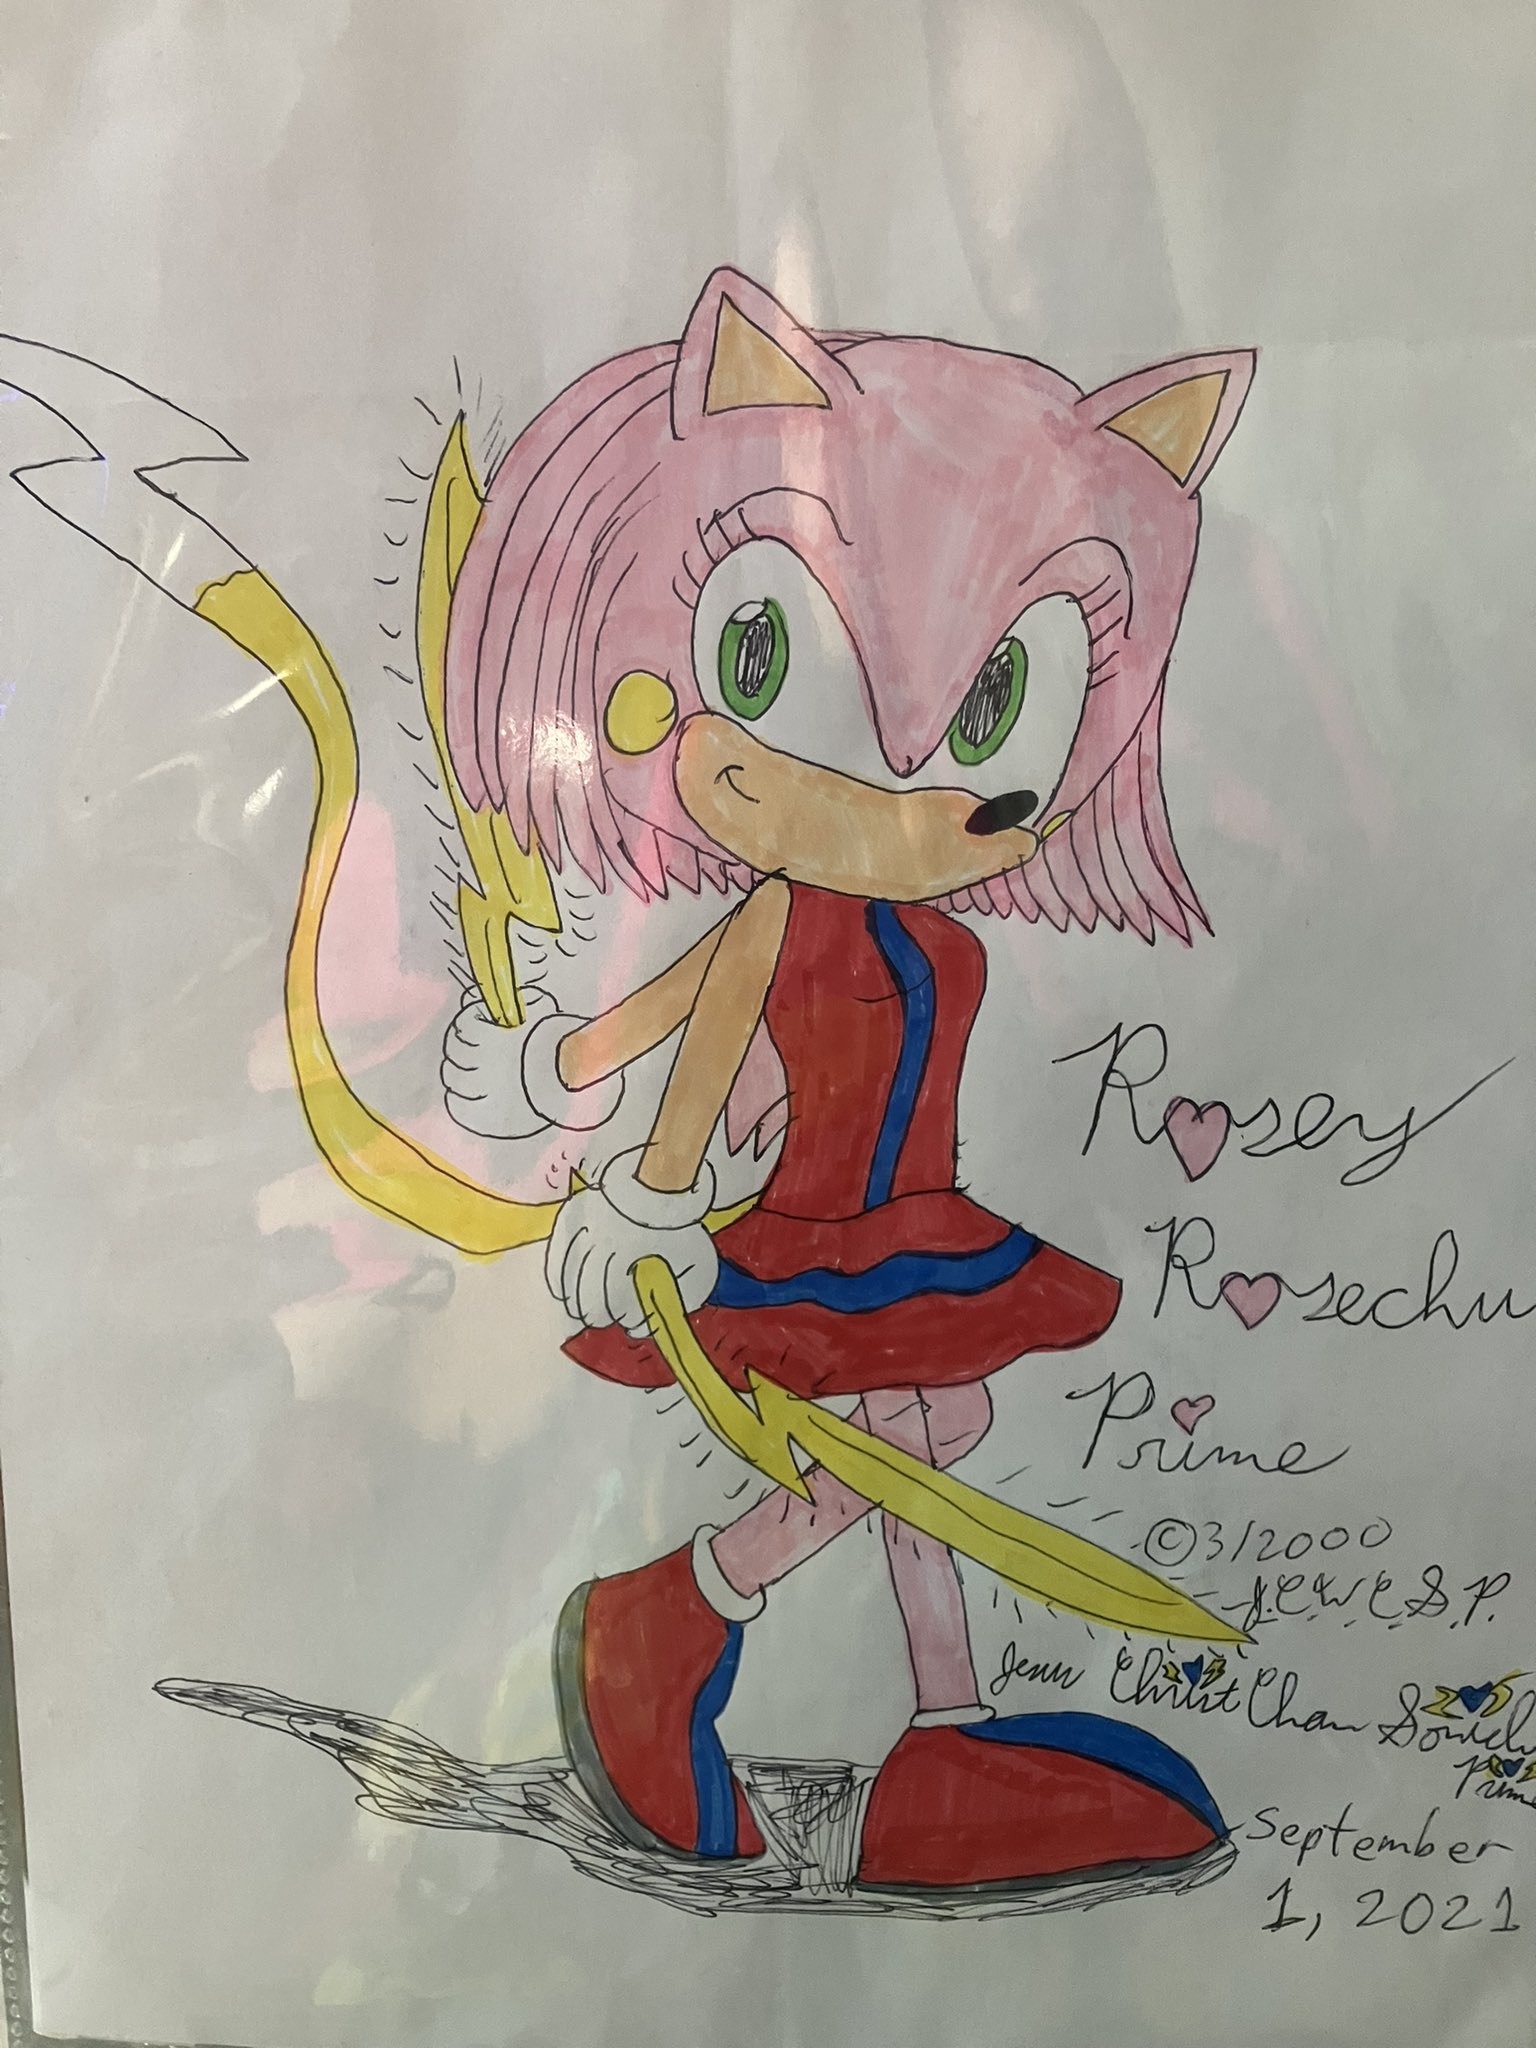 Chris got upset they changed Sonic's arm color, but here he is nonchalantly redesigning Rosechu. (He added yellow cheeks for those who didn't notice)